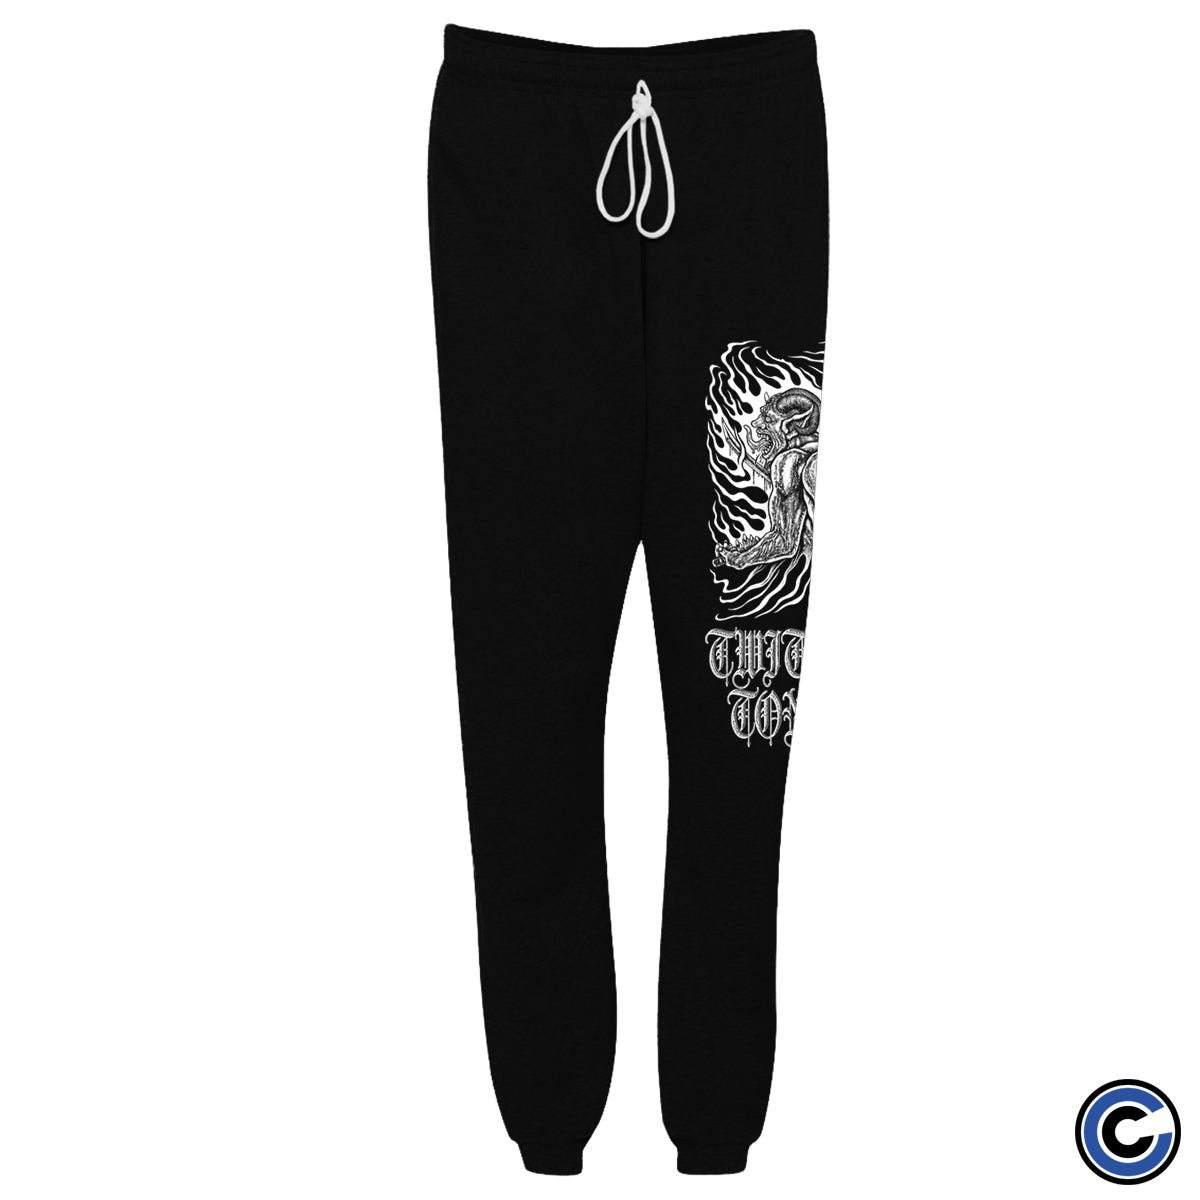 Twitching Tongues "Double Devil" Joggers